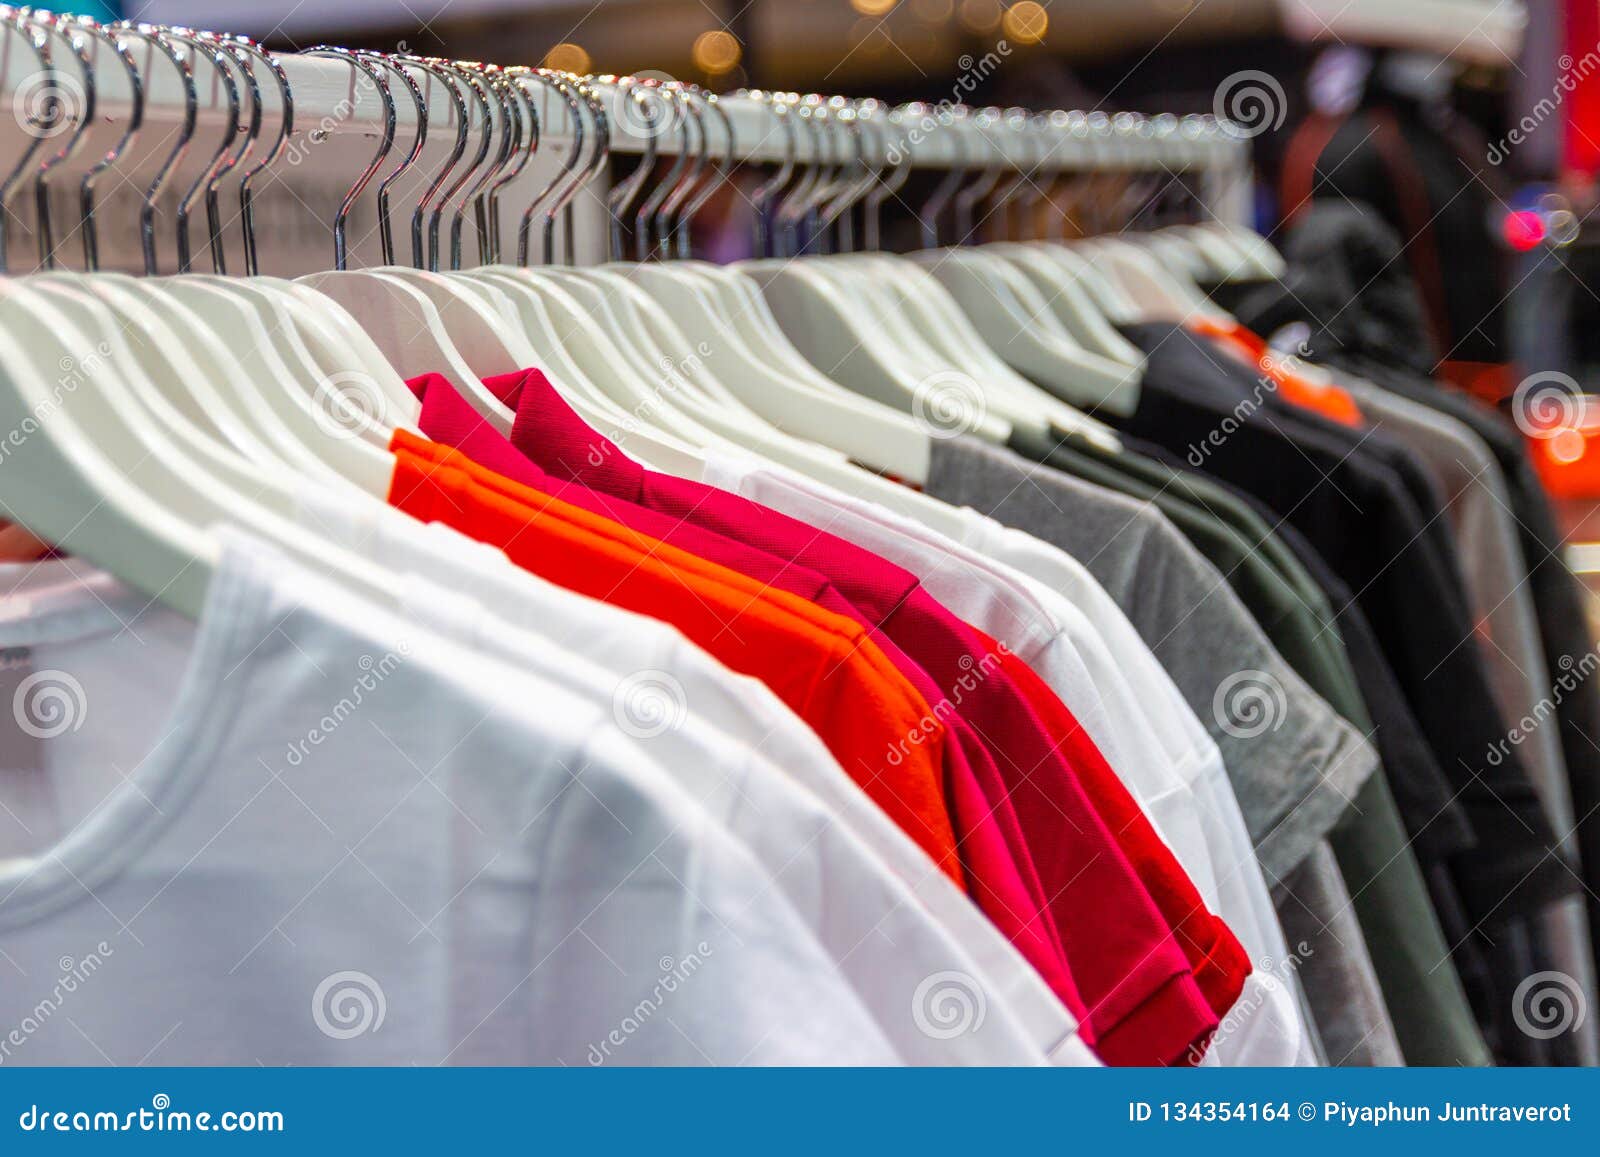 Colorful T-shirt on Hangers for Sale Stock Photo - Image of retail ...